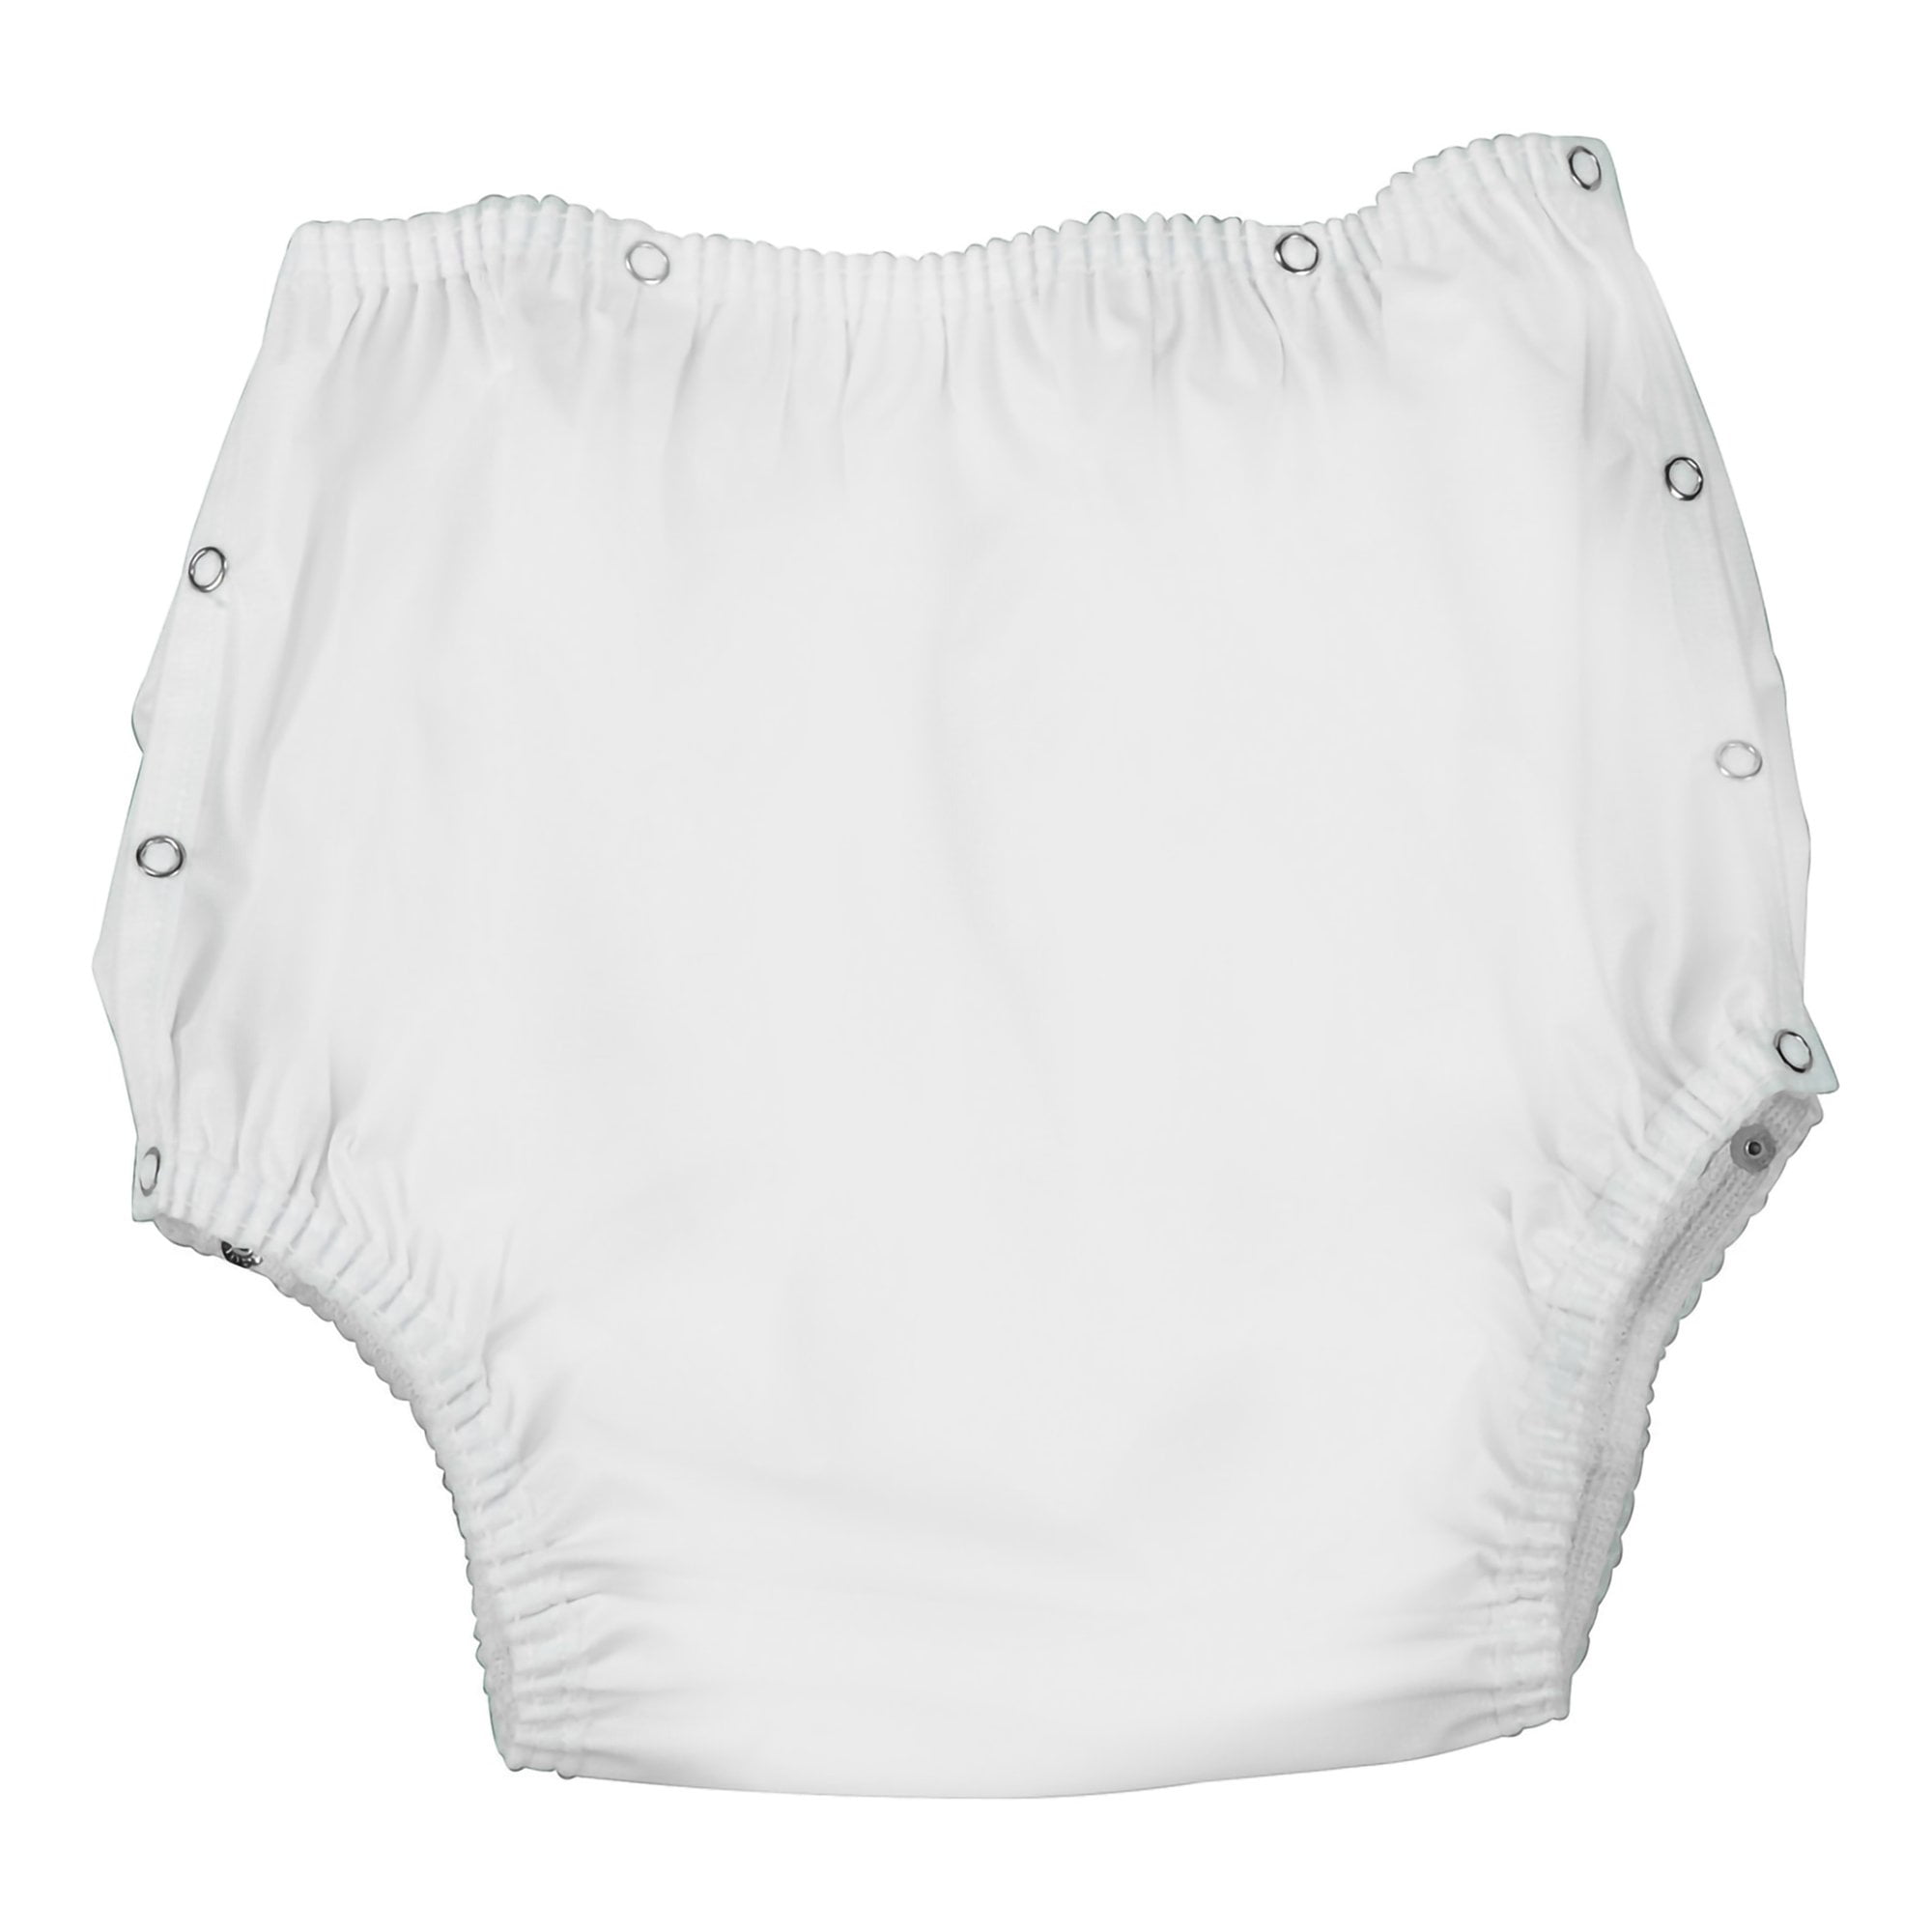 DMI Waterproof Incontinence Underwear for Disabled, Elderly, Handicapped,  Potty Training, Pregnancy or Postpartum, Pull On, Medium 30-36 